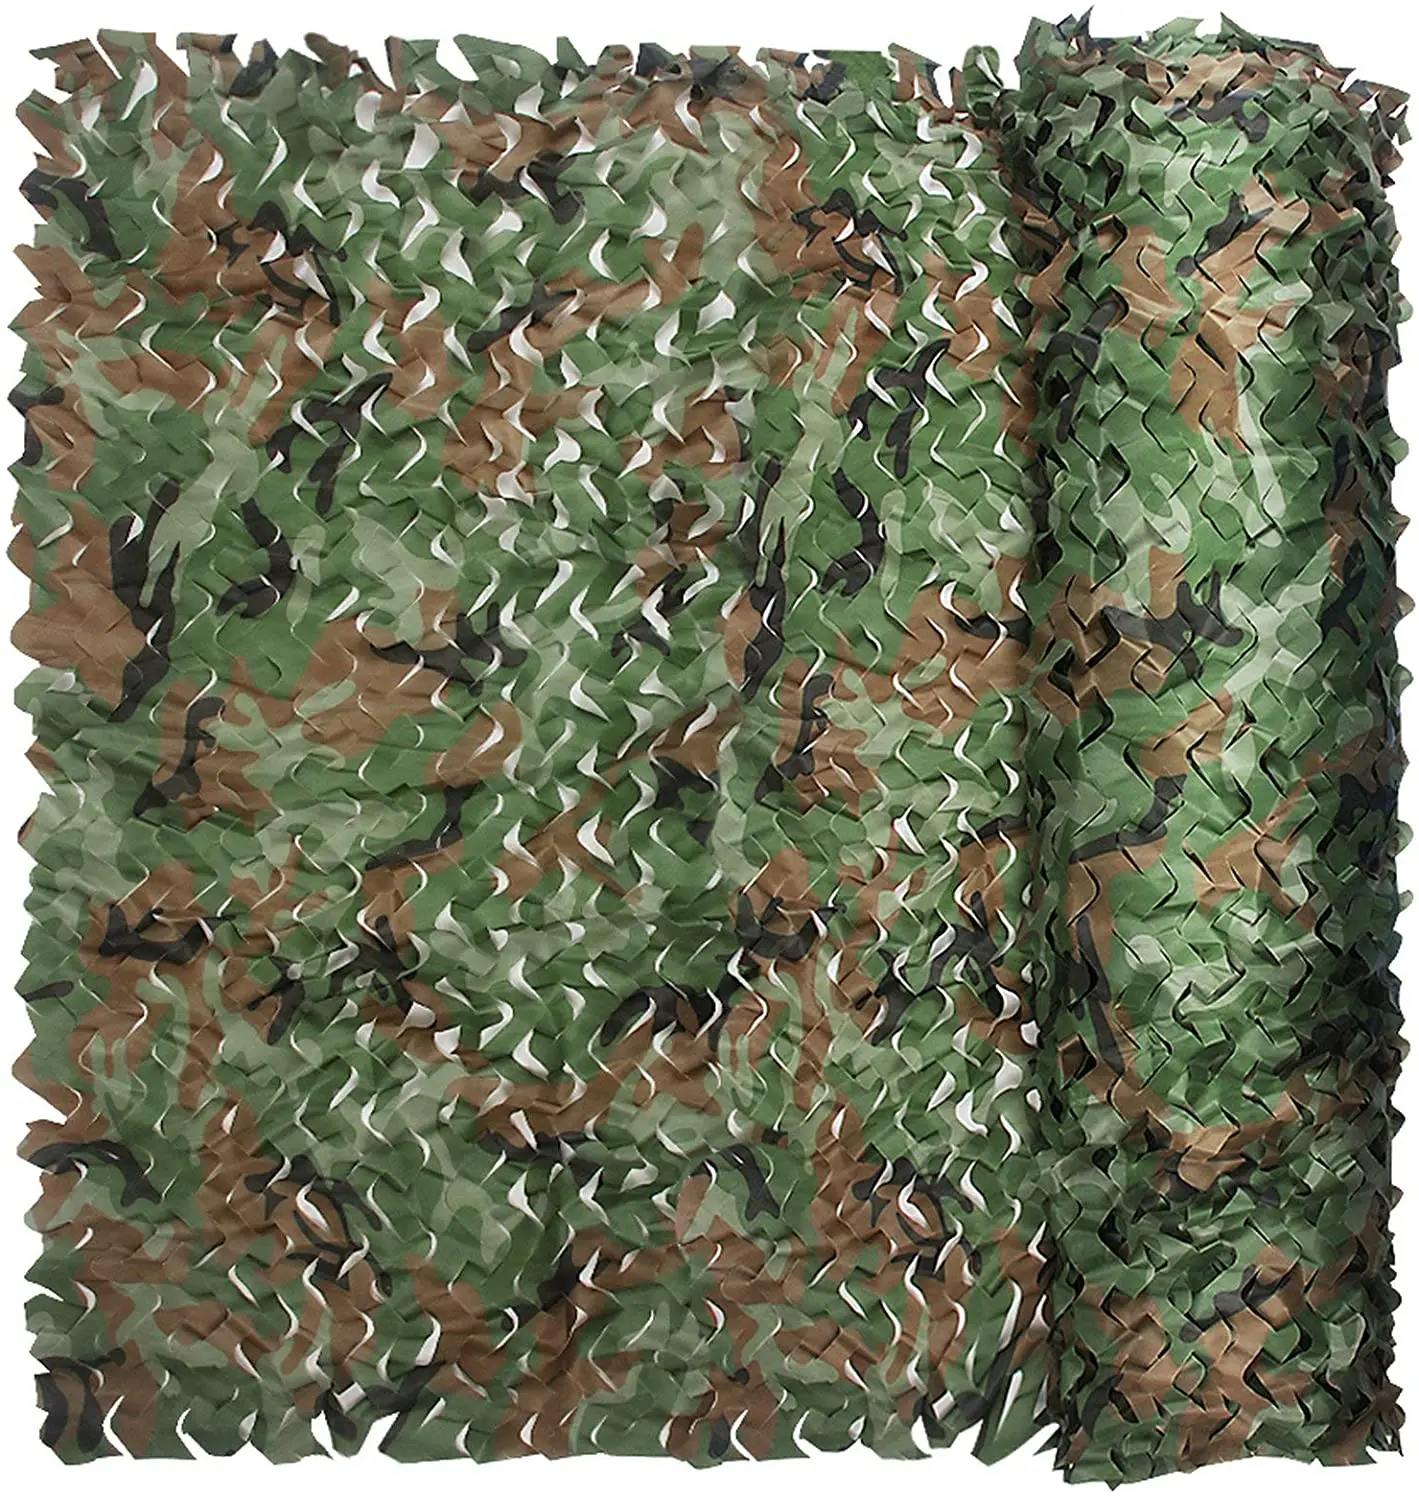 Bulk Roll Camo Cradle Mesh Camouflage Net For Hunting,Disguise,Sunshade,Camping 